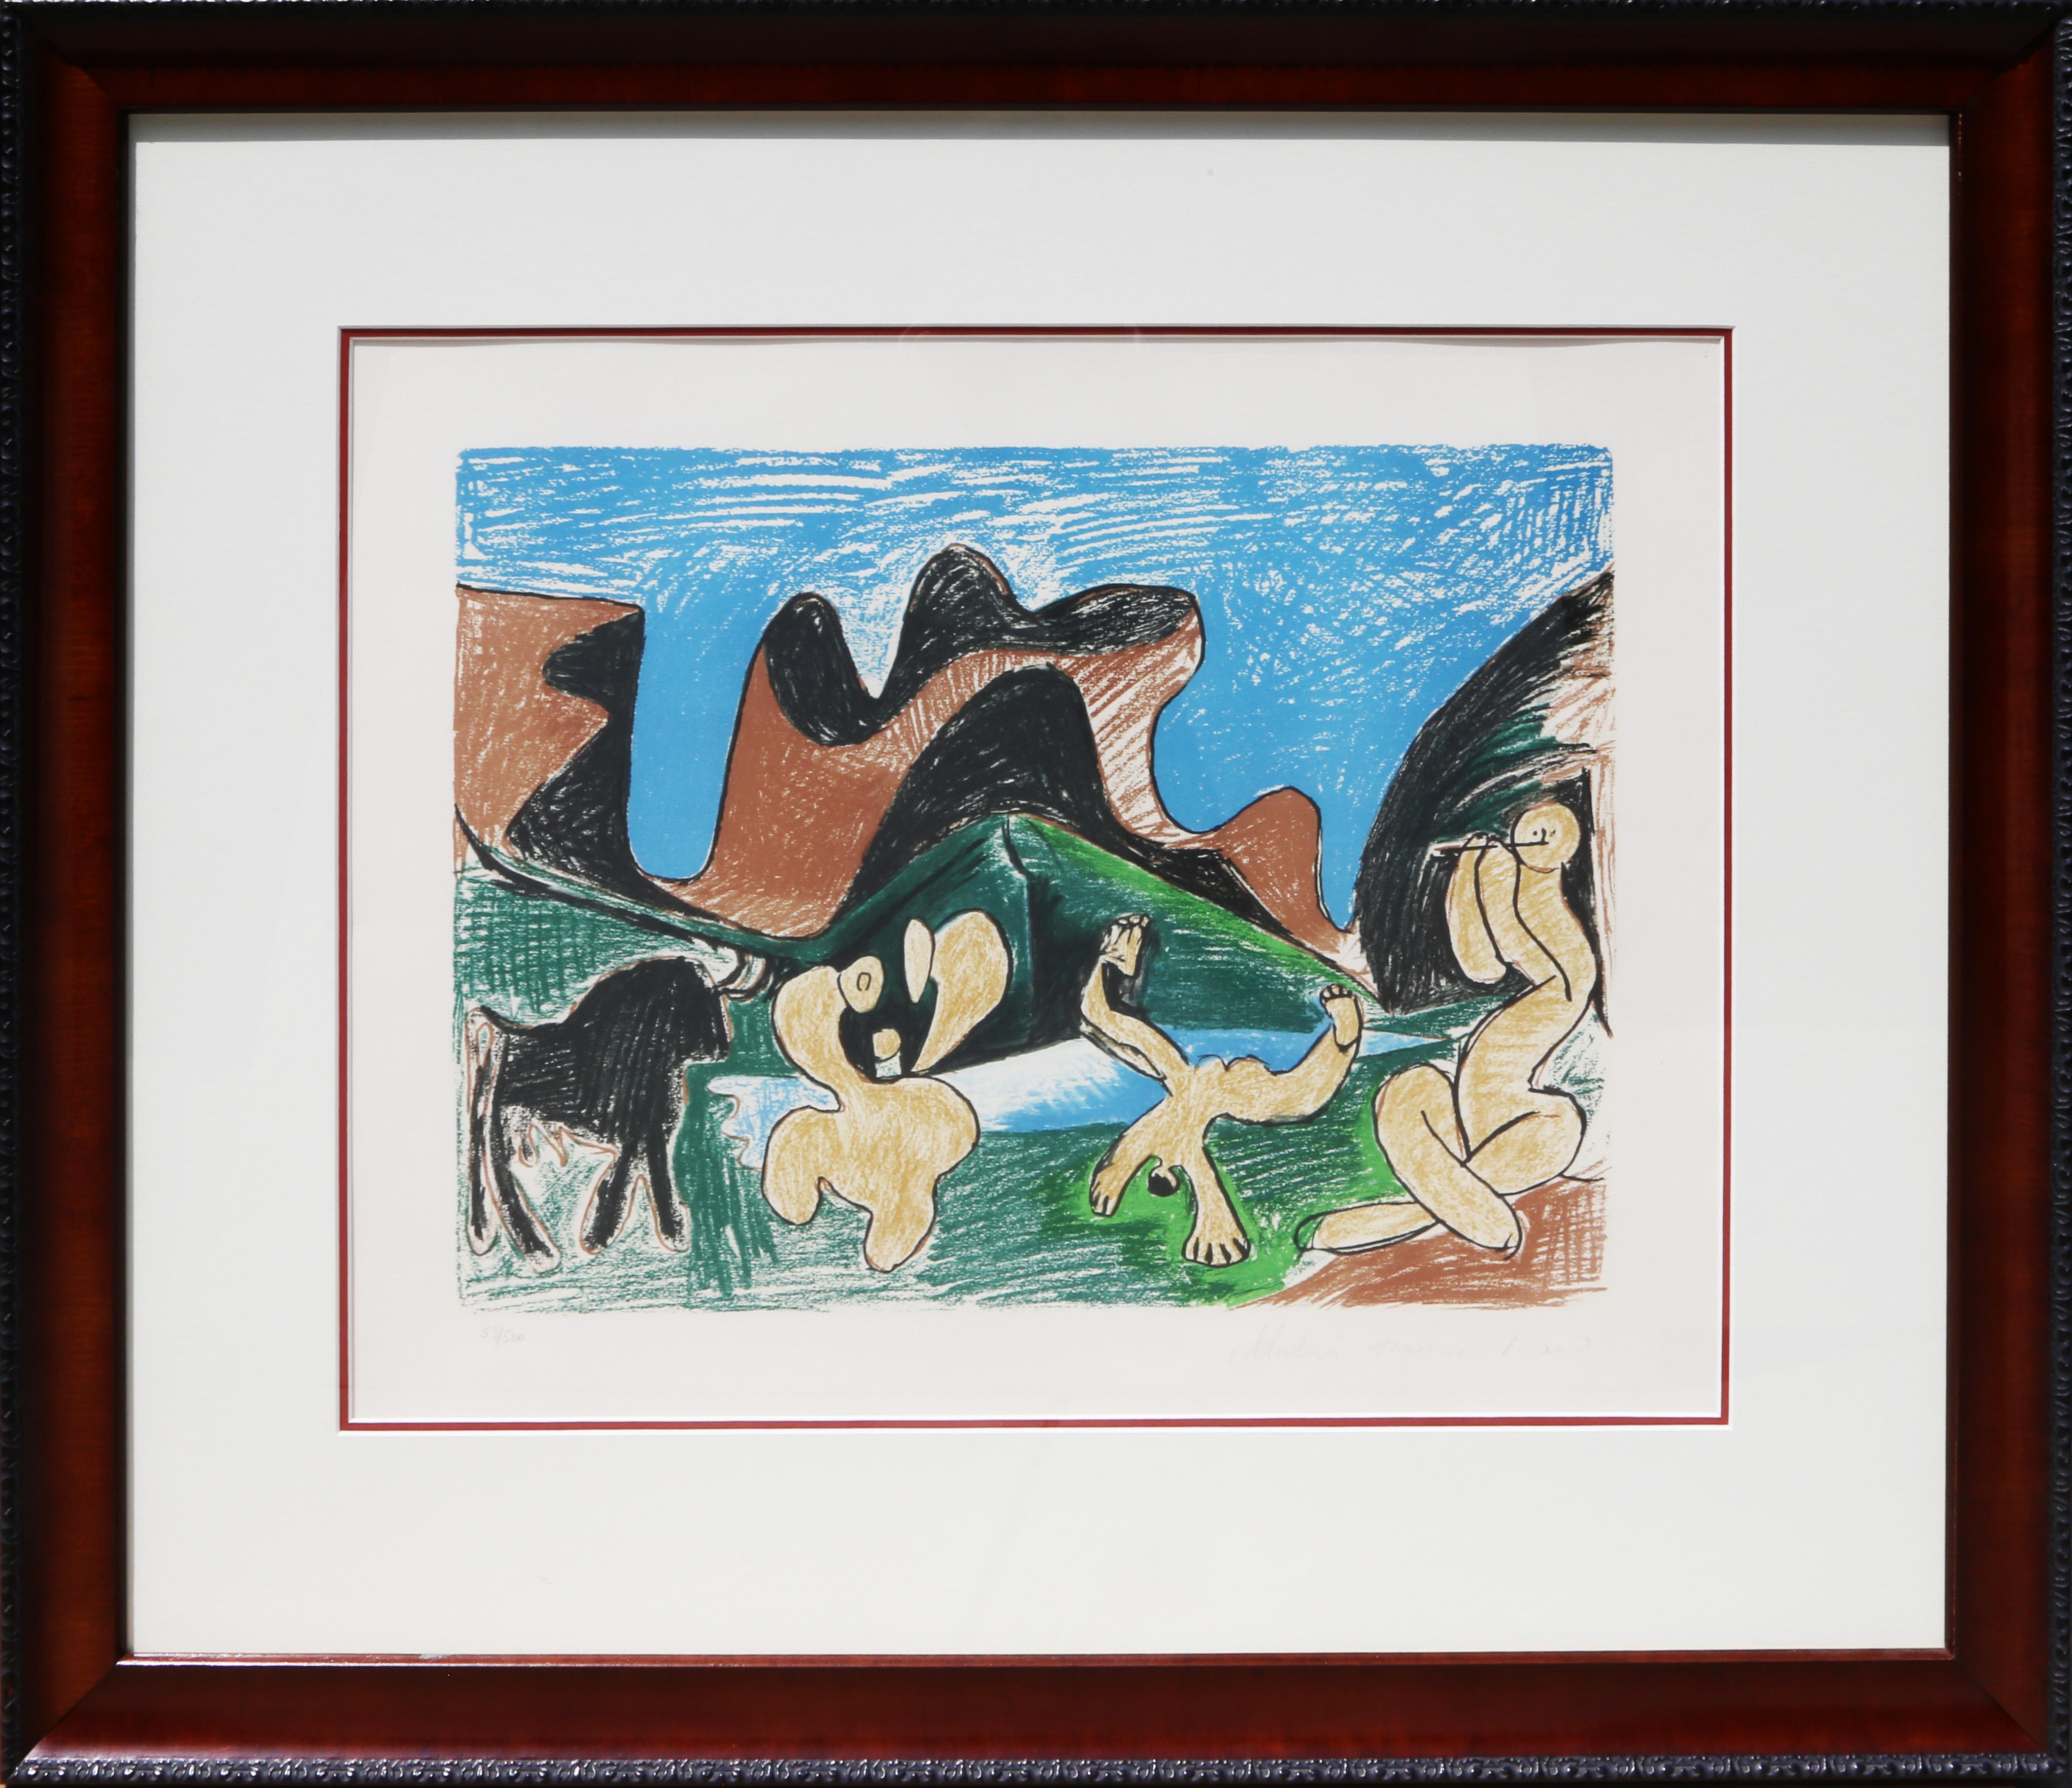 A lithograph from the Marina Picasso Estate Collection after the Pablo Picasso painting "Bacchanale".  The original painting was completed circa 1922. In the 1970's after Picasso's death, Marina Picasso, his granddaughter, authorized the creation of